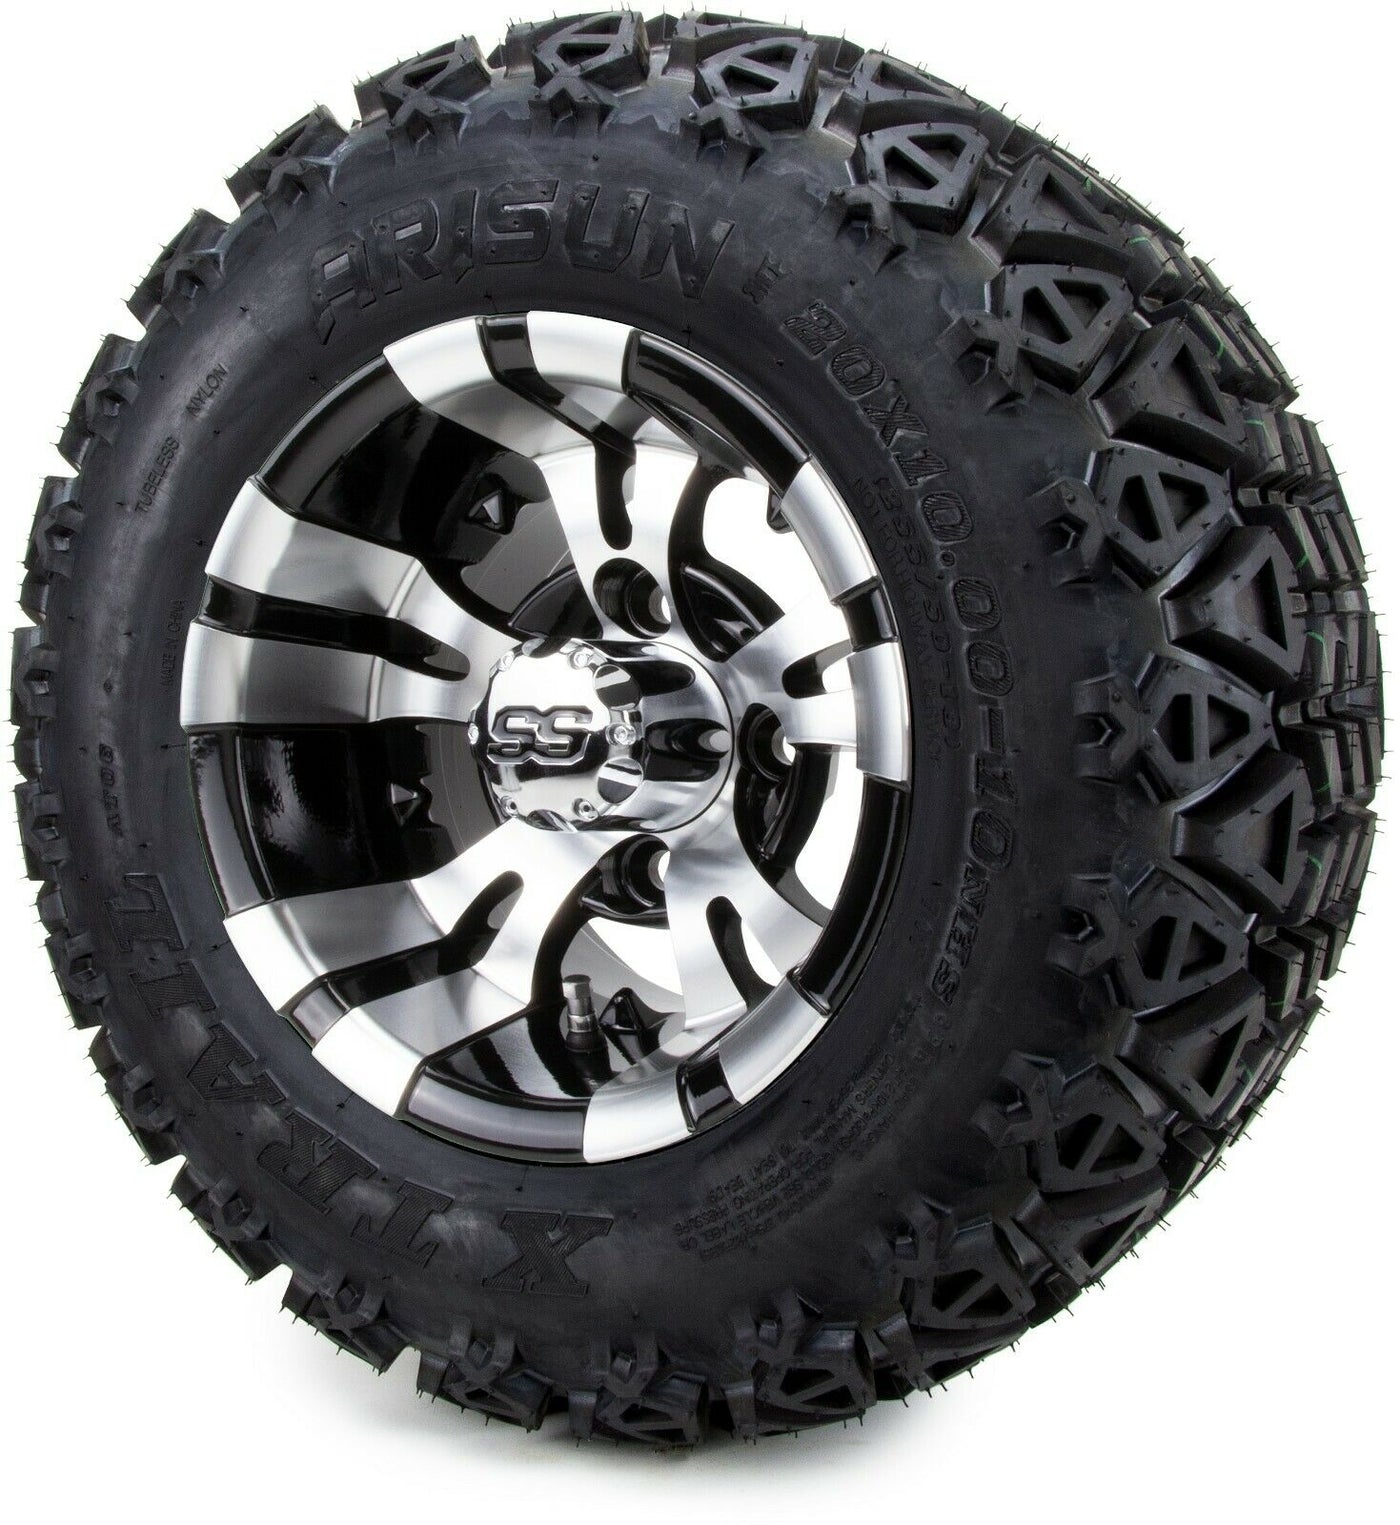 10" VAMPIRE MACHINED/BLACK - 22x10.00-10 All-Terrain TIRES AND WHEELS COMBO (SET OF 4)